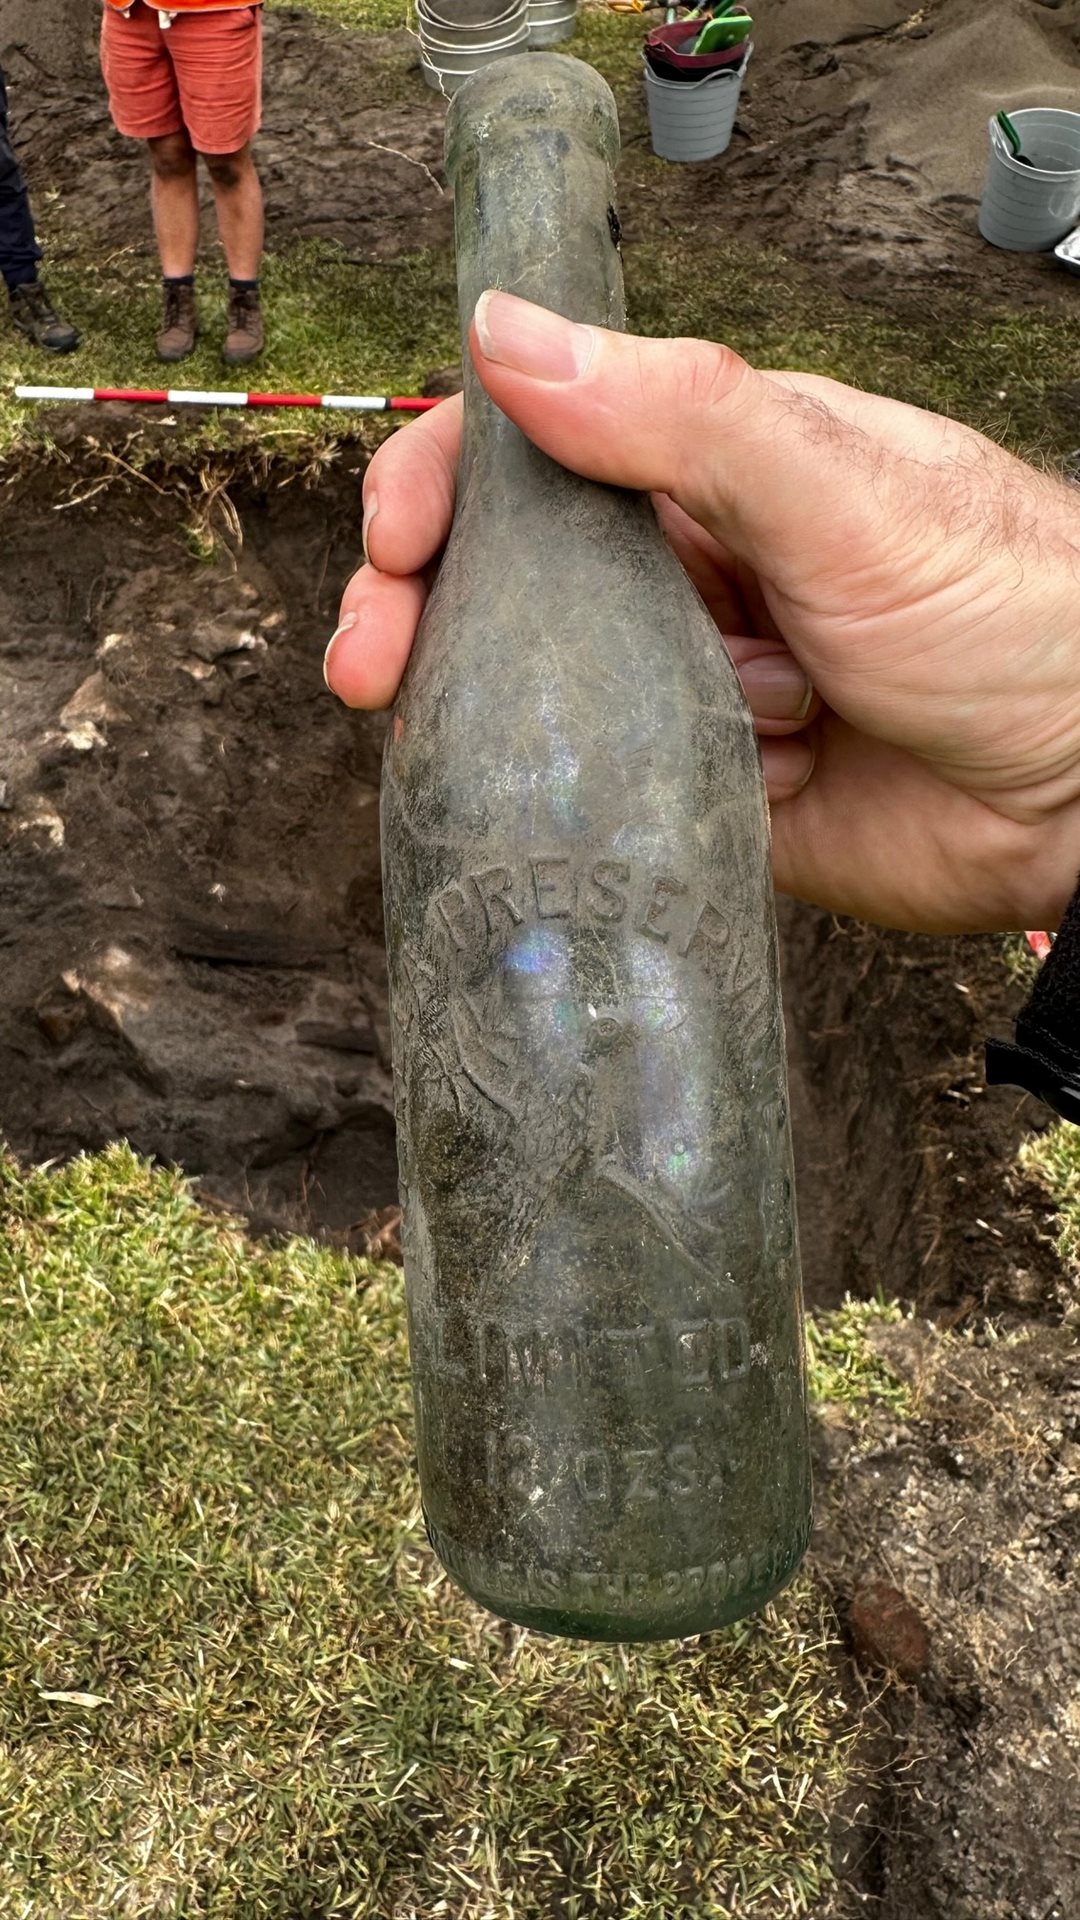 An old Rosella bottle recently uncovered from the site. <span class="sr-only">opens in a new window</span> <span class="sr-only">opens in a new window</span> <span class="sr-only">opens in a new window</span> <span class="sr-only">opens in a new window</span> <span class="sr-only">opens in a new window</span> <span class="sr-only">opens in a new window</span> <span class="sr-only">opens in a new window</span> <span class="sr-only">opens in a new window</span> <span class="sr-only">opens in a new window</span> <span class="sr-only">opens in a new window</span>